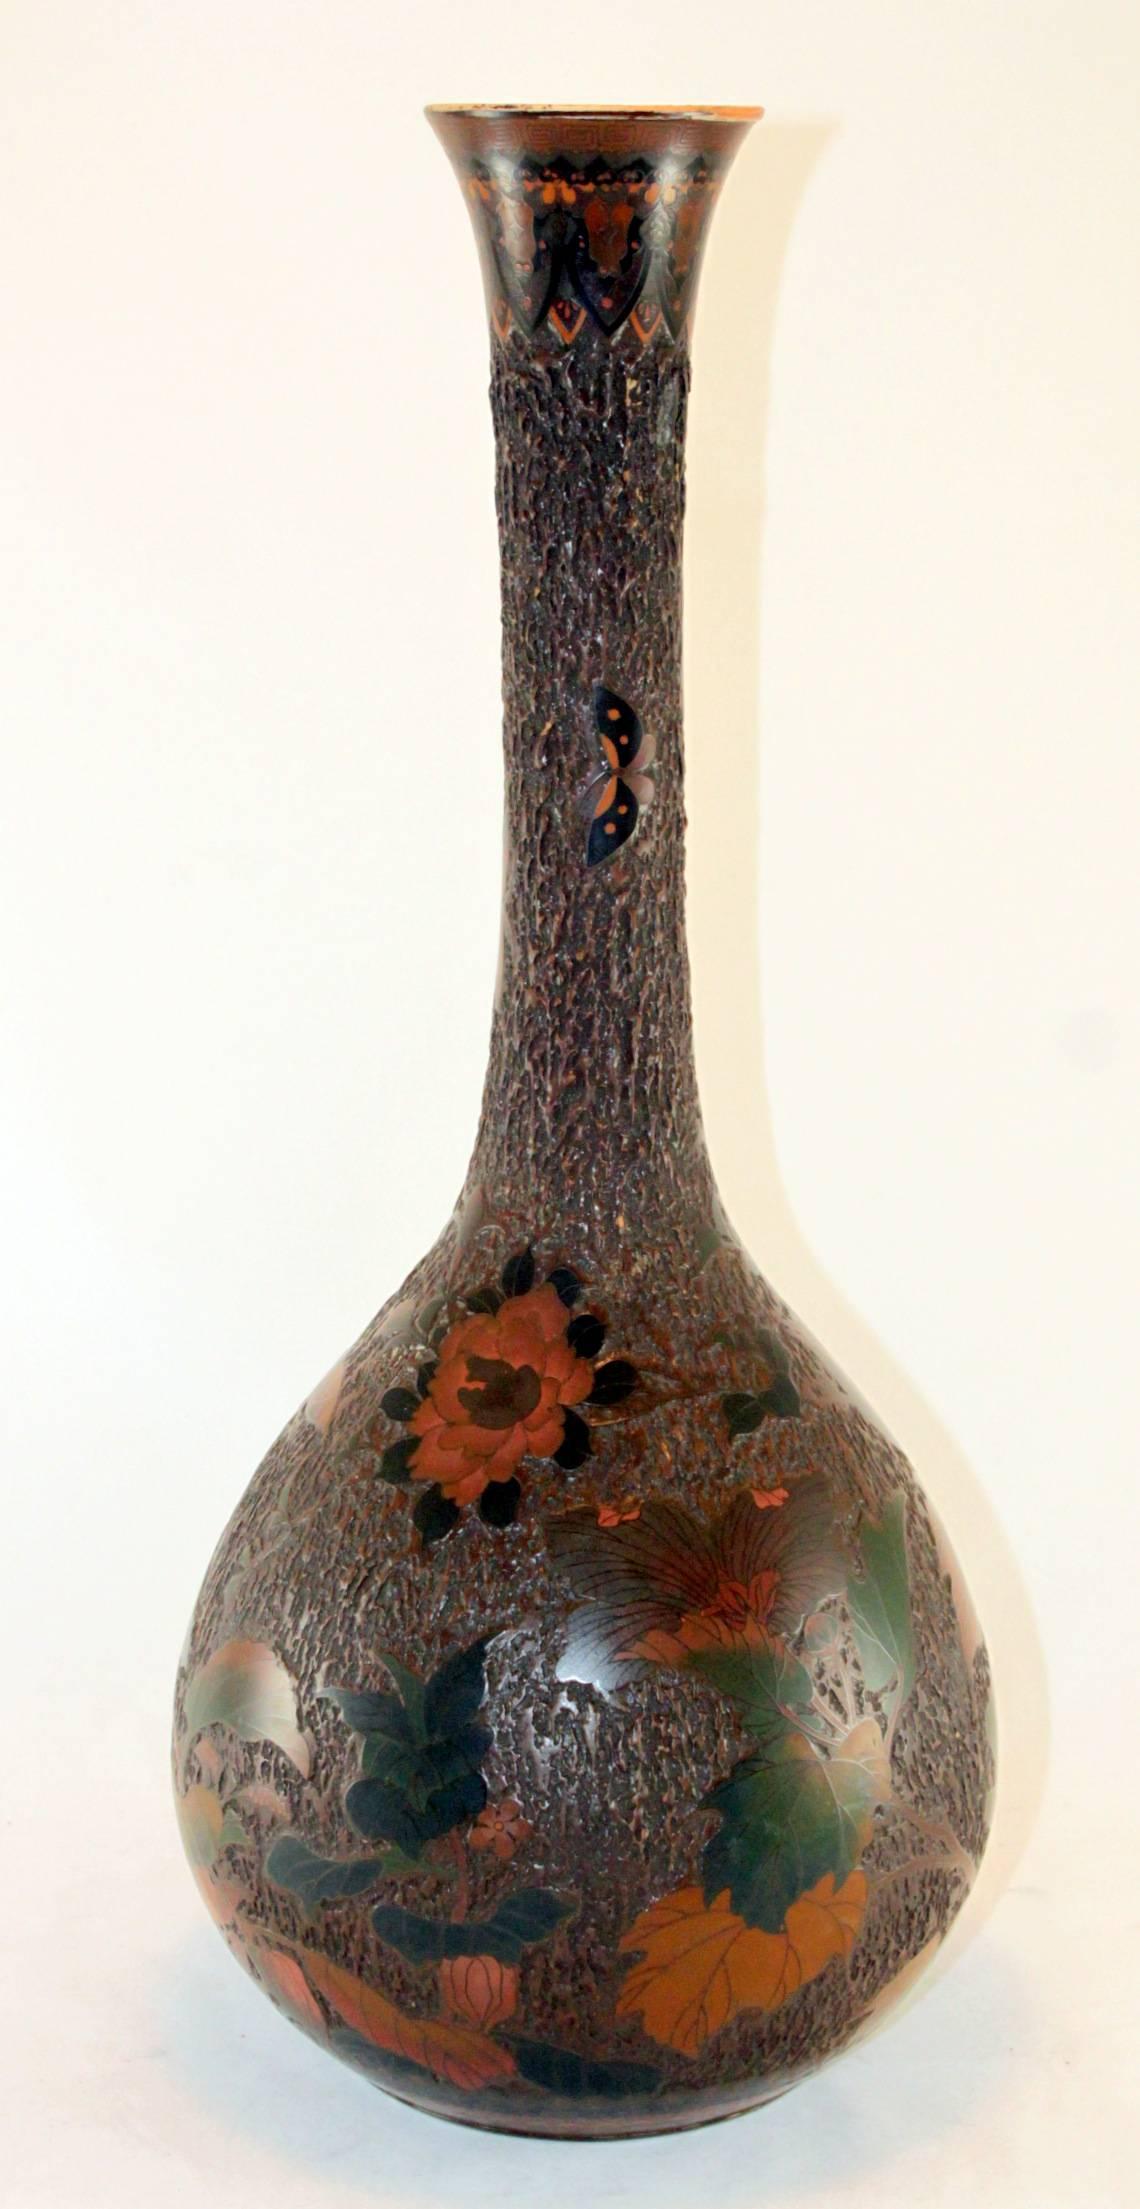 “Tree-Bark” cloisonne Japanese Jiki-shippo cloisonne’ on porcelain bulbous vase 
19th century 

Jiki-shippo literally, “porcelain-enamel,” is enamel work that is decorated on a porcelain body or foundation that has been fired at a high